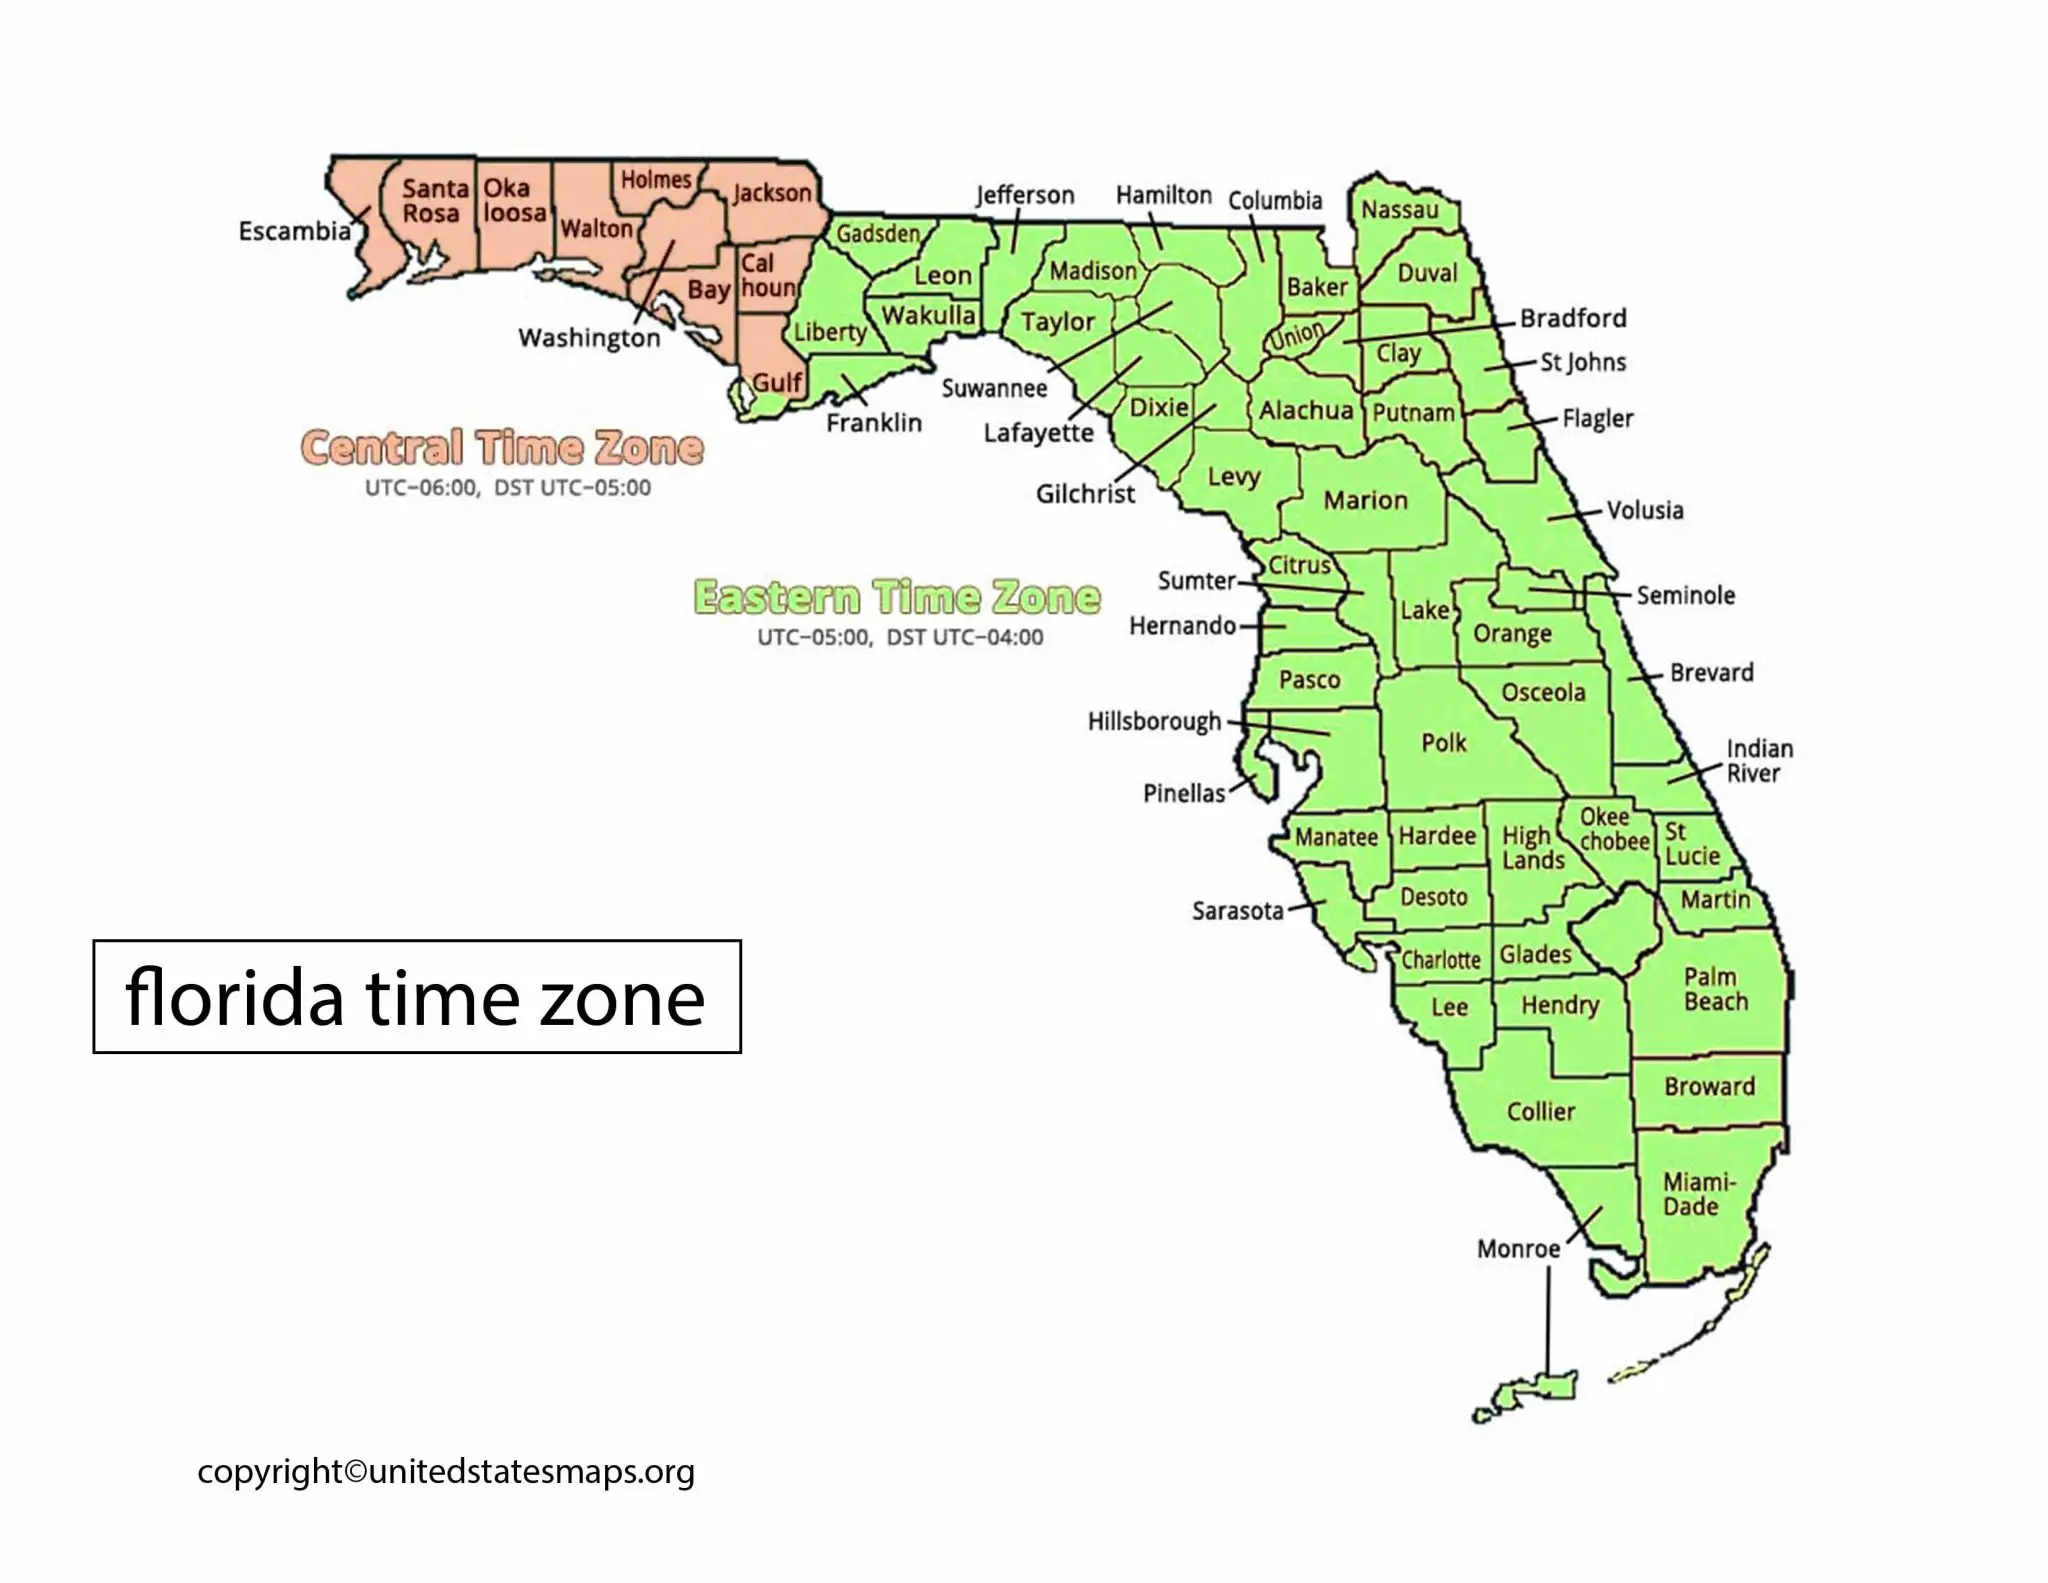 south florida time zone